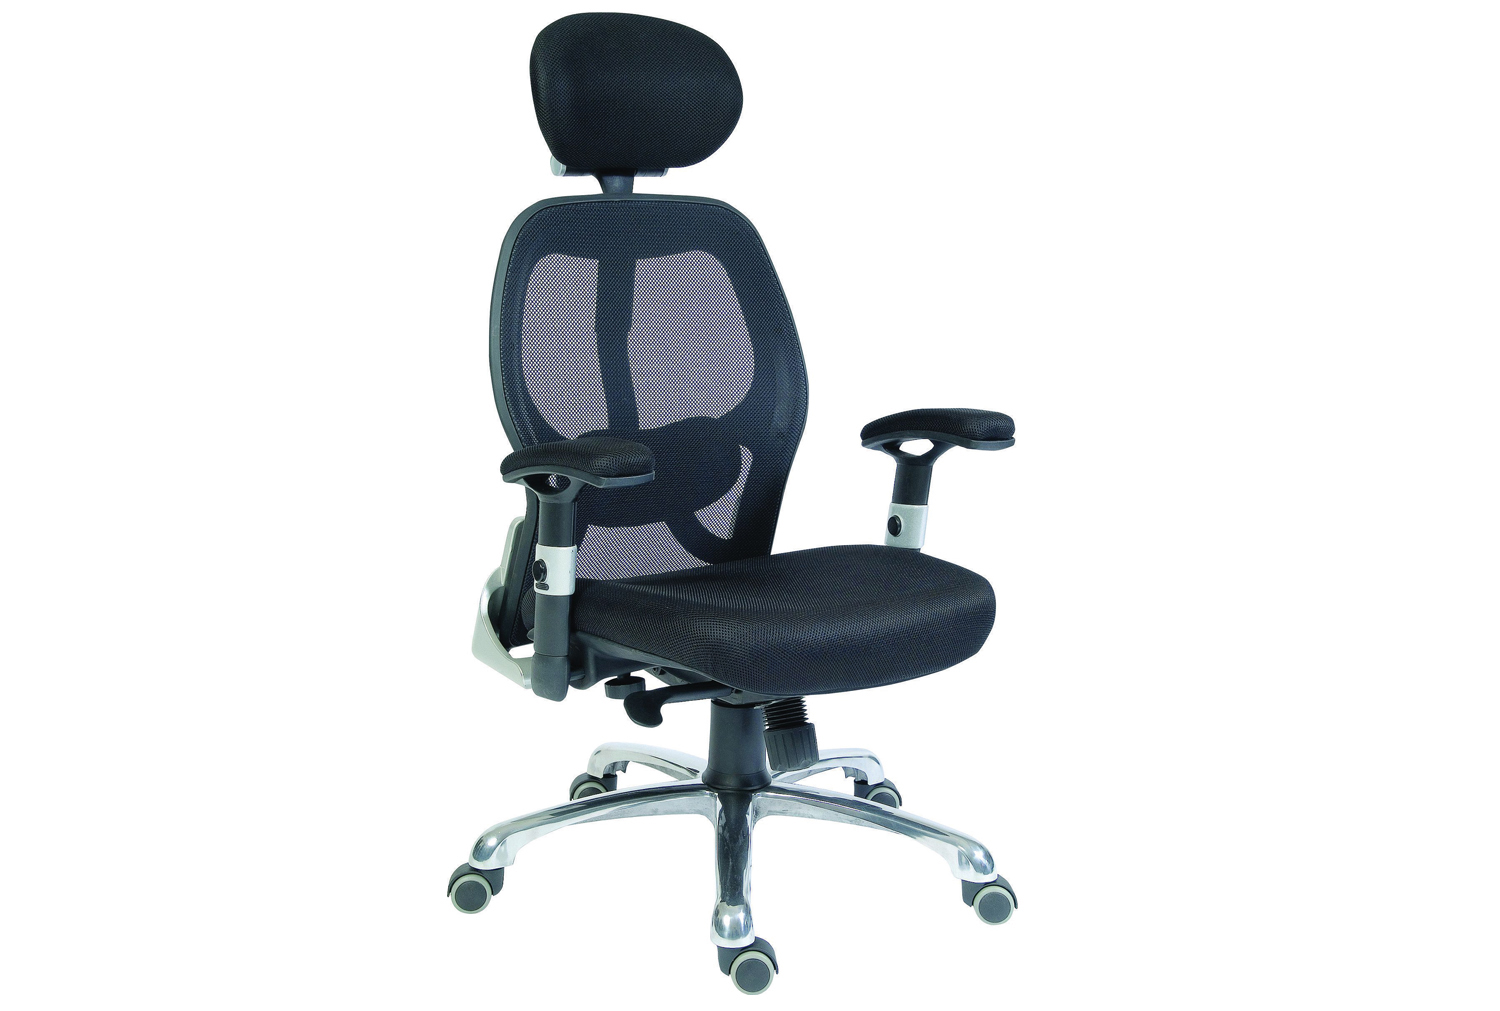 Cobham Black Mesh Back Executive Office Chair, Black, Fully Installed